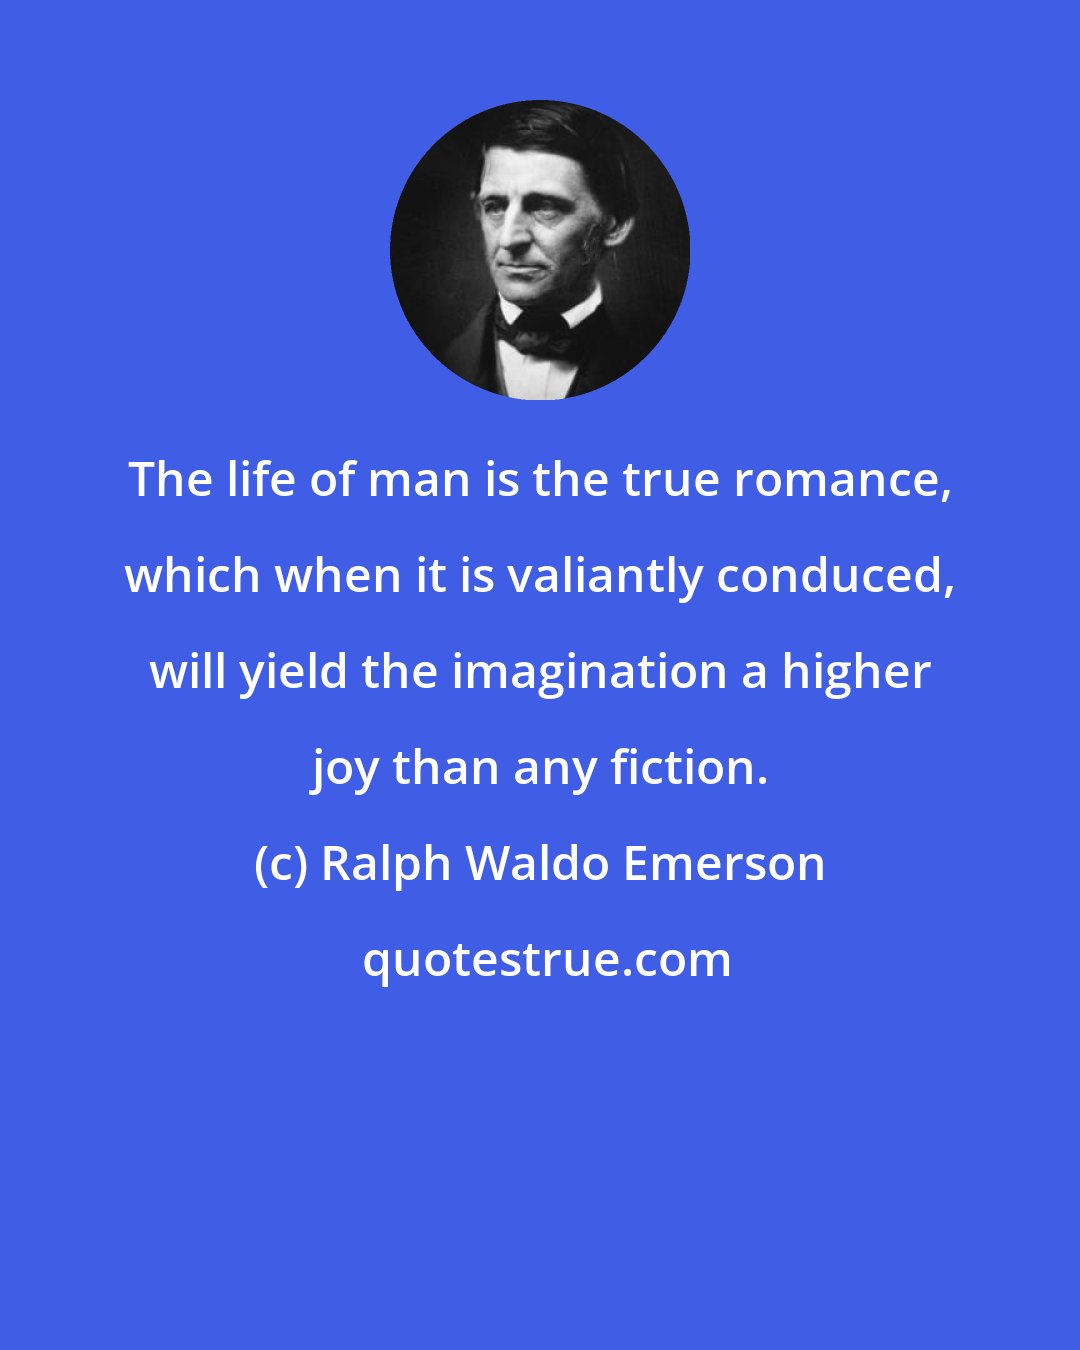 Ralph Waldo Emerson: The life of man is the true romance, which when it is valiantly conduced, will yield the imagination a higher joy than any fiction.